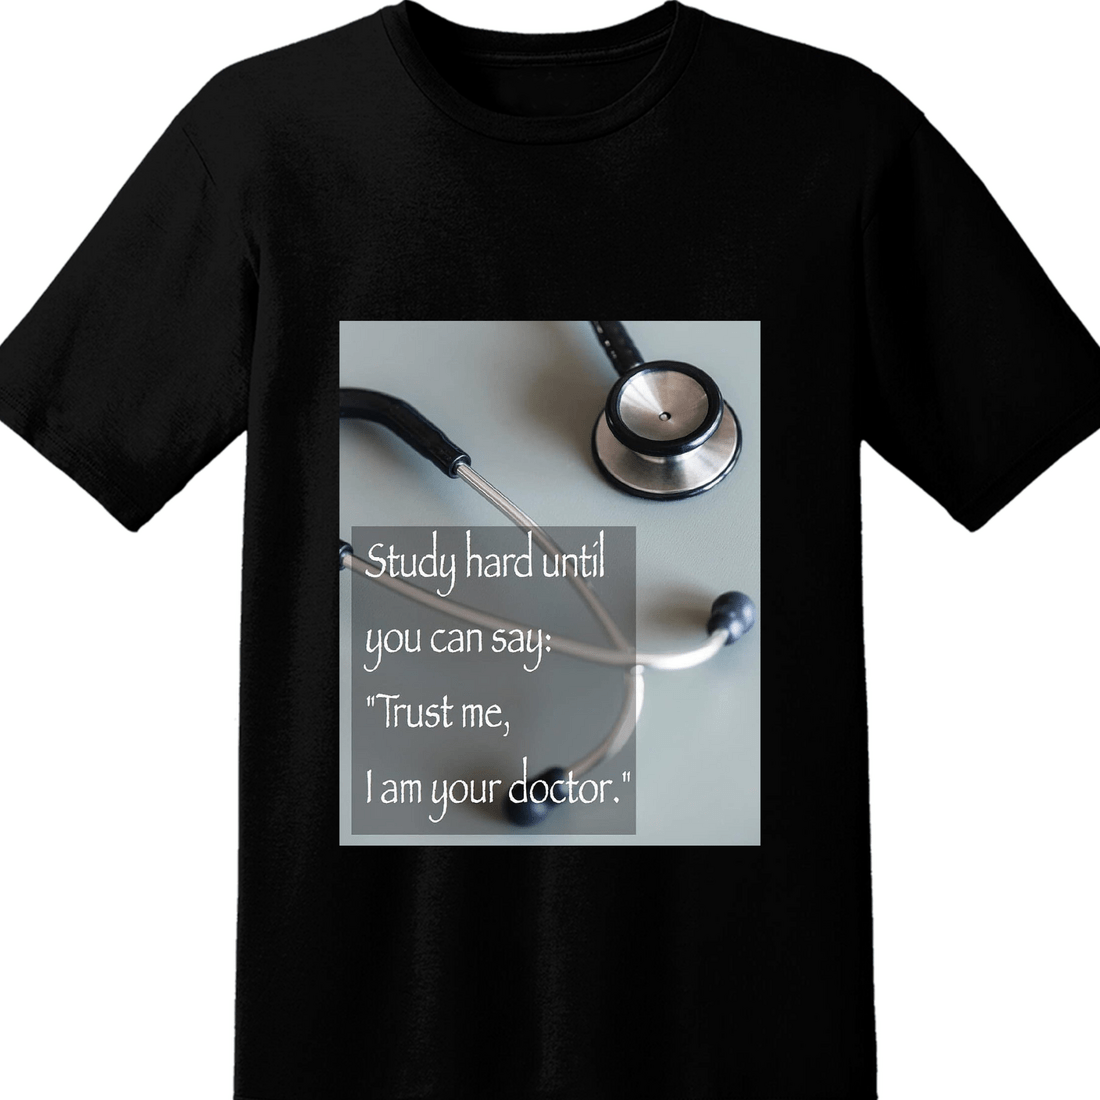 Doctors Day Special Round neck T-Shirt cover image.